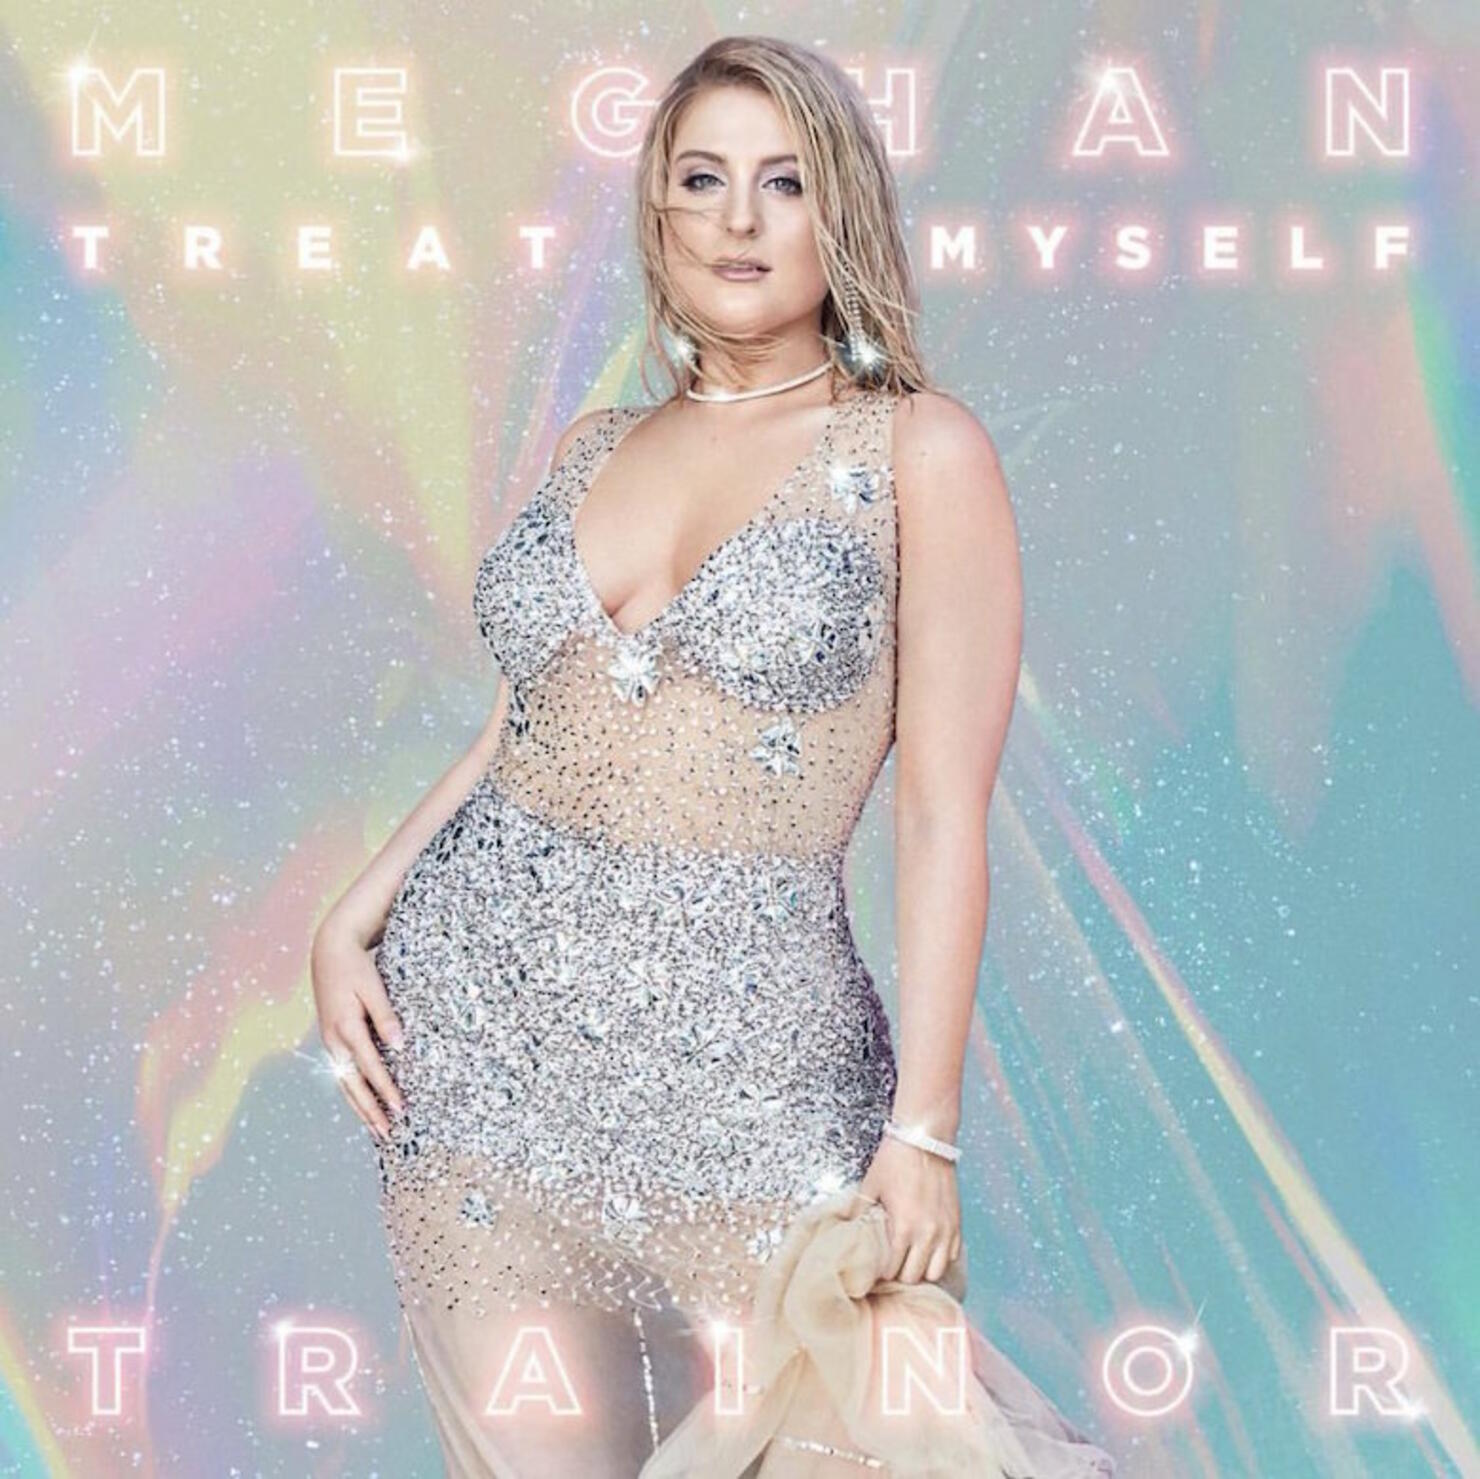 Meghan Trainor Reveals Very Sparkly Album Cover Album Title And Release Date Iheart